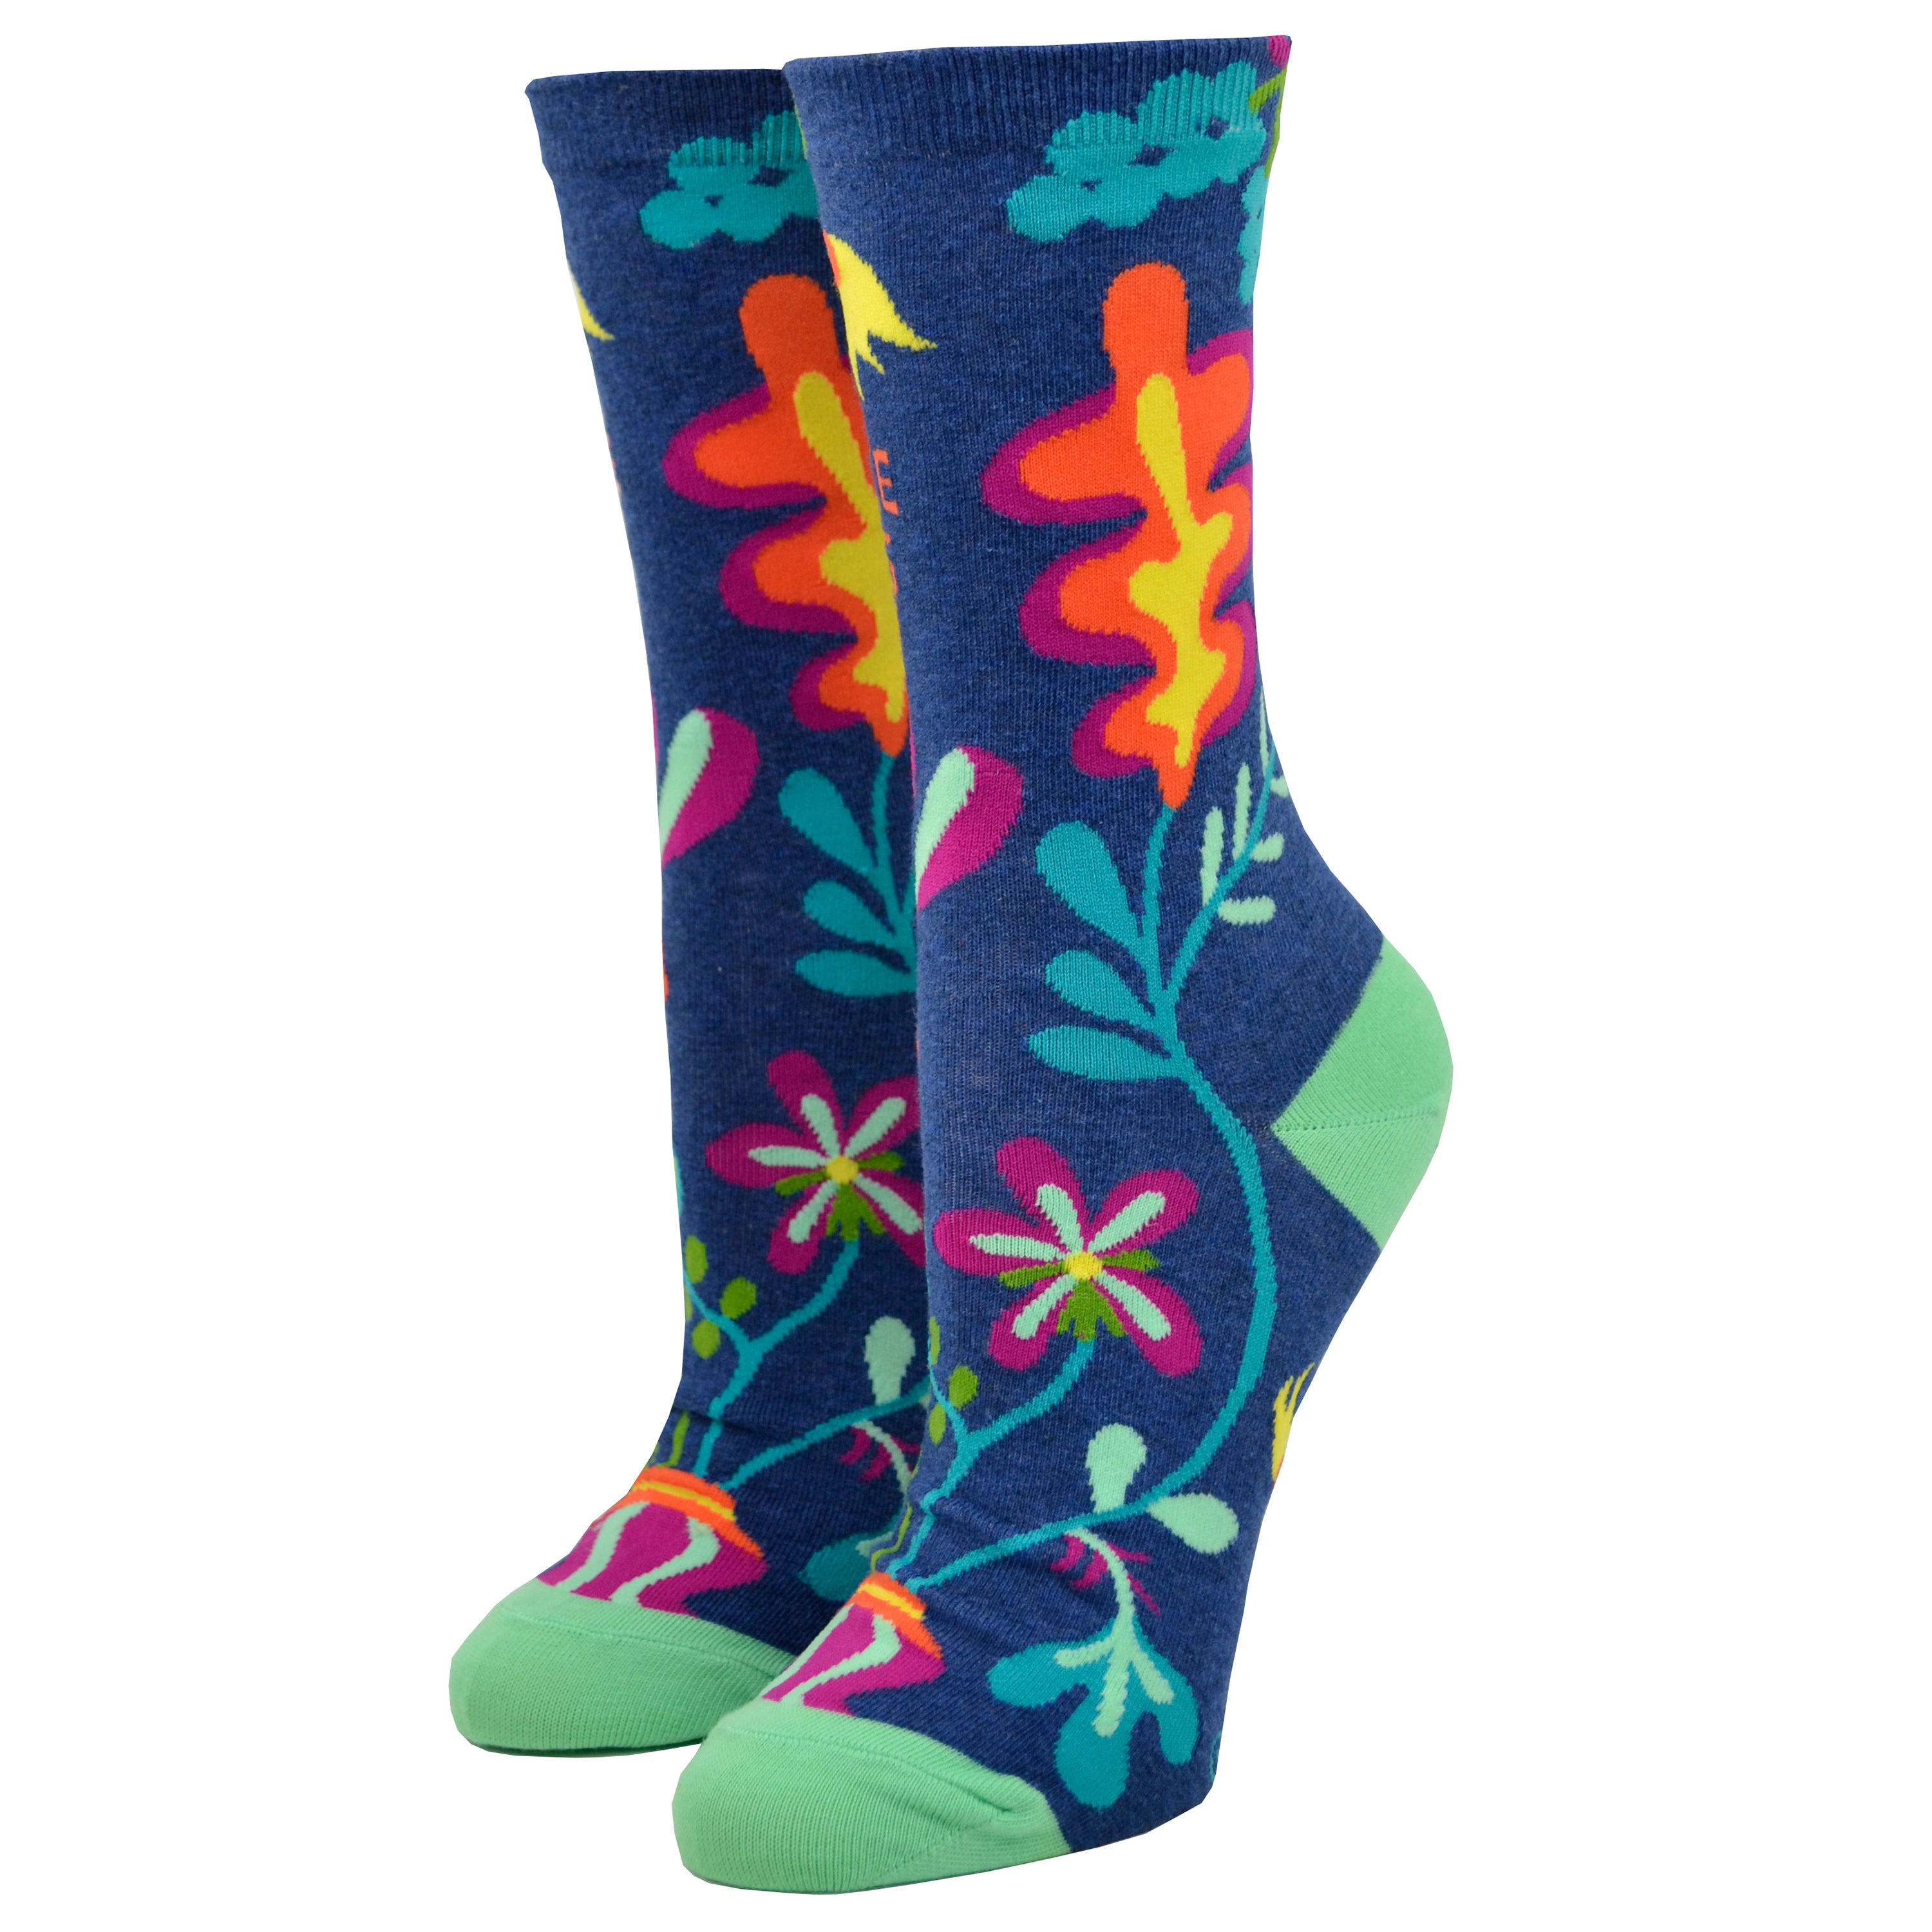 Shown on leg froms from the motif side, a pair of Blue Q brand women's nylon and combed cotton socks in navy blue with a teal heel and toe. These socks feature an all over motif of psychedelic inspired flowers and the phrase 